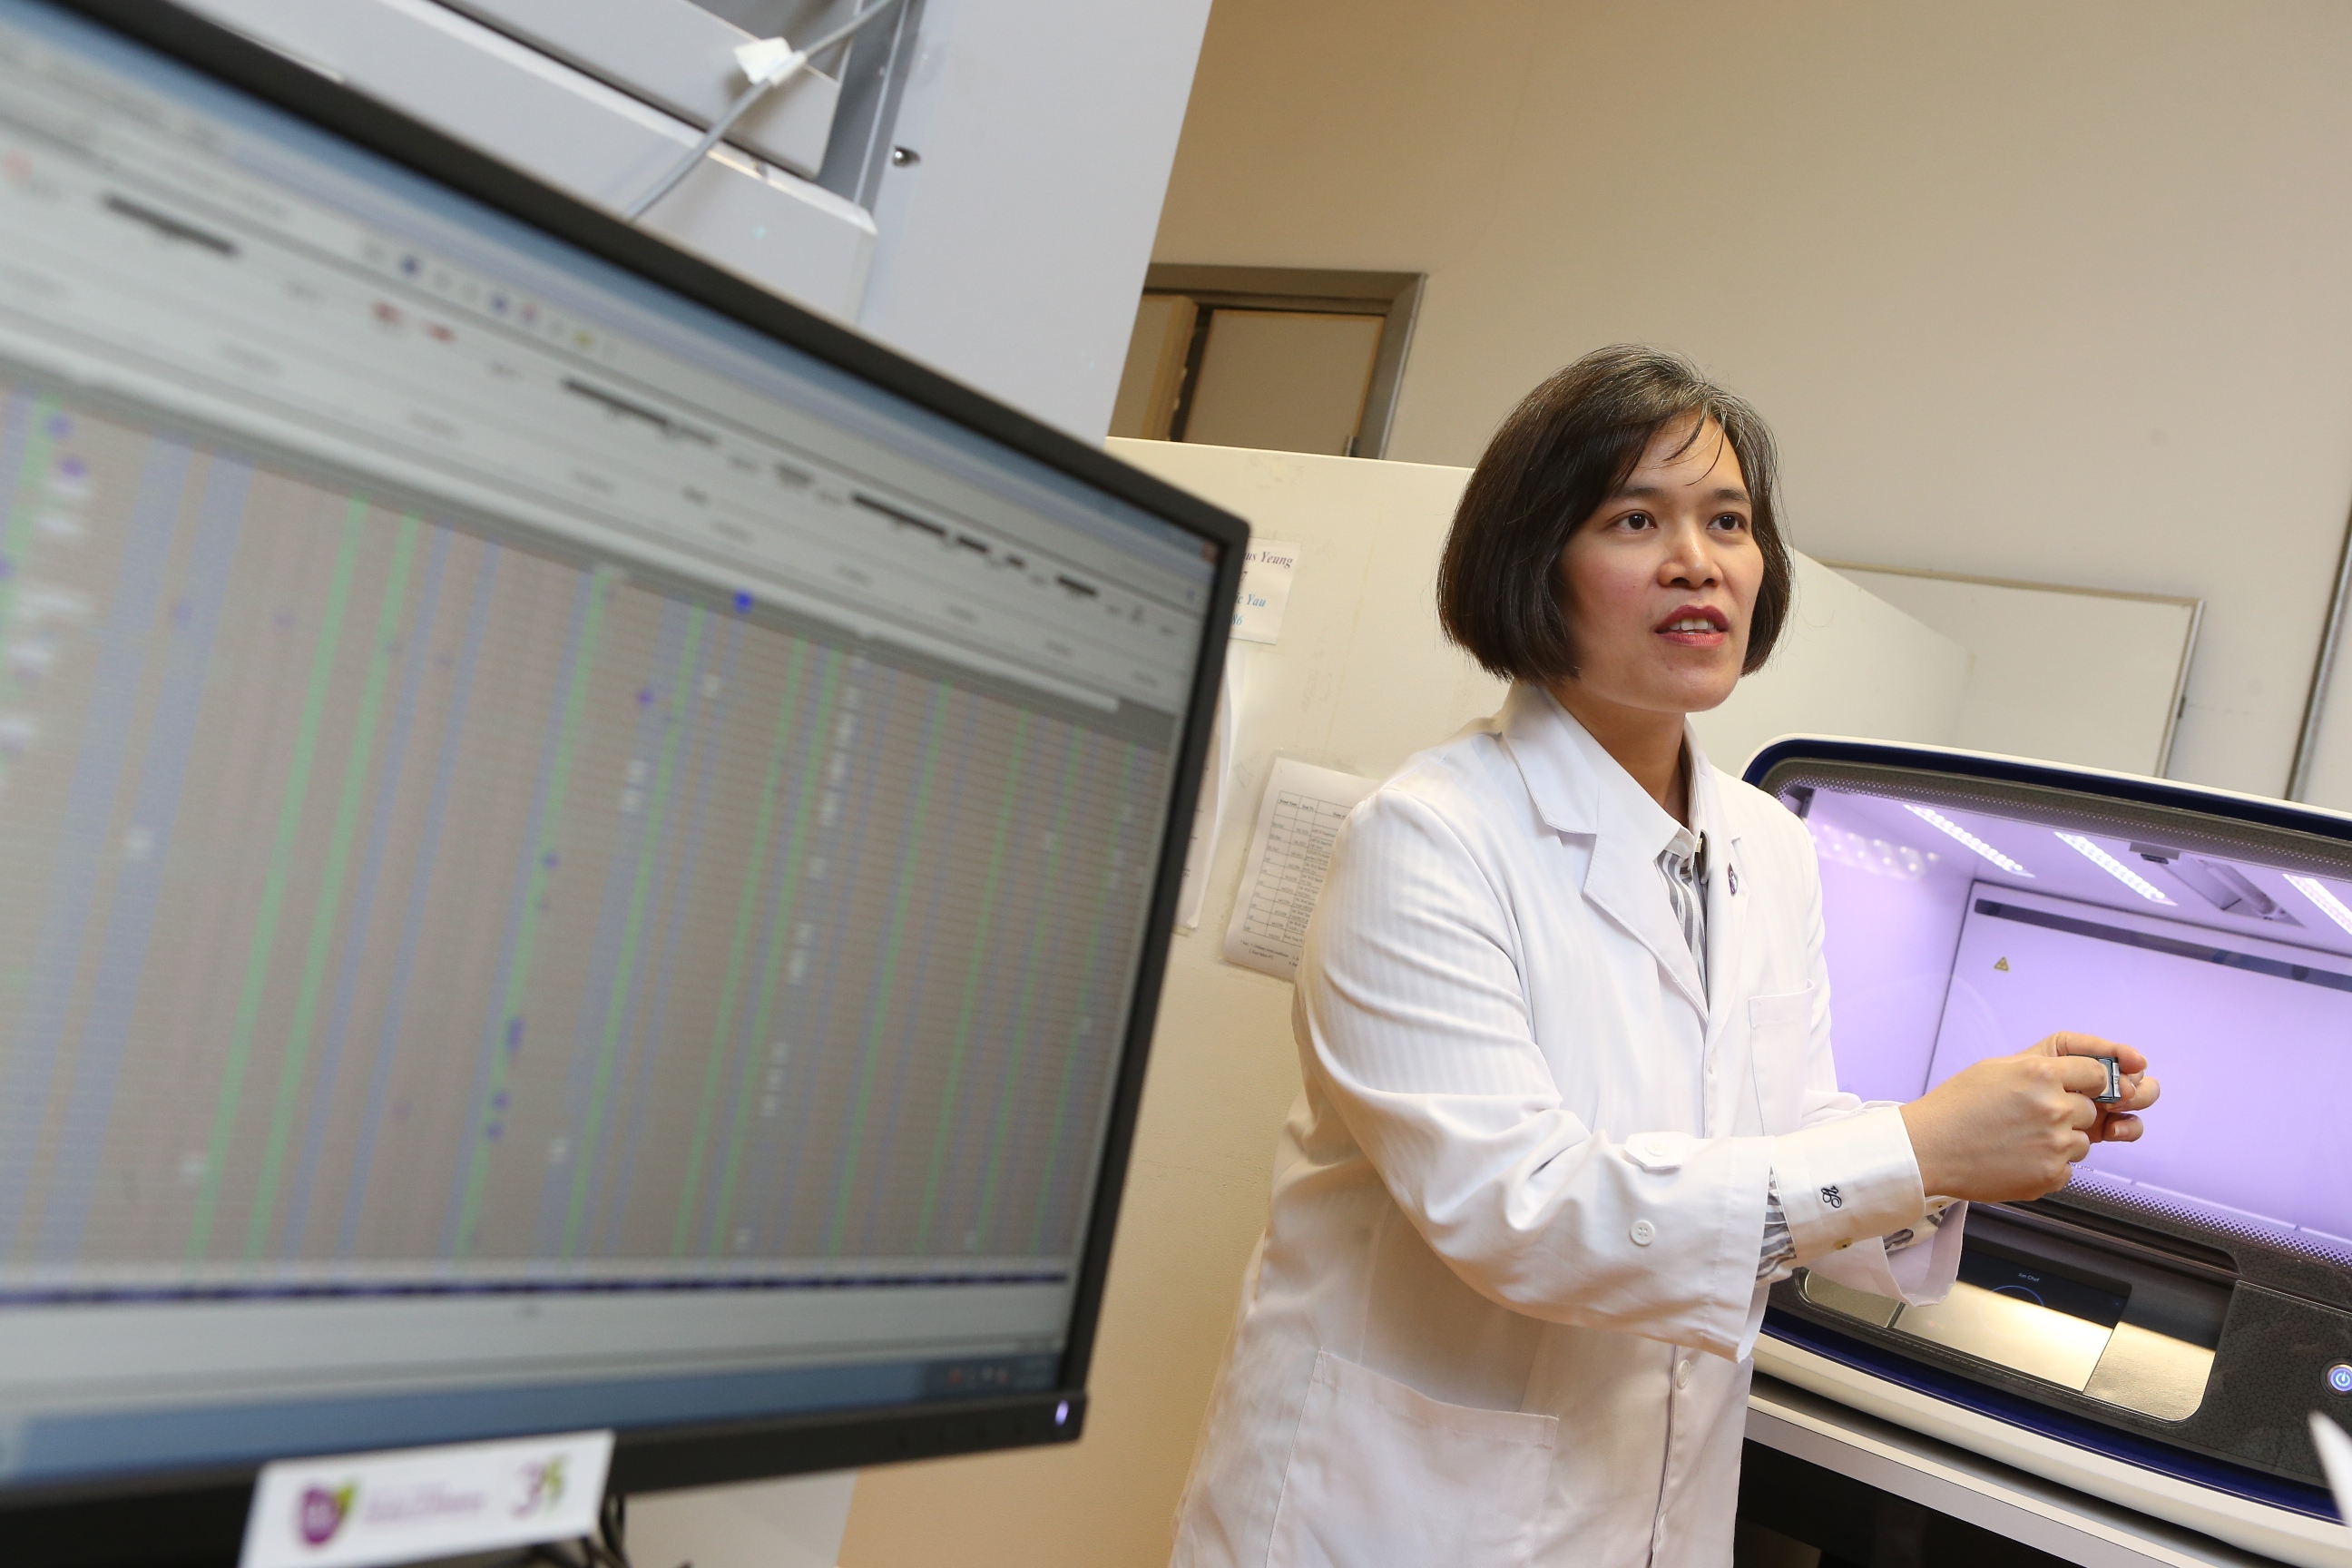 Professor LUI wants to promote the use of multi-gene pharmacogenomics analysis for Hong Kong ovarian cancer patients to help identify tumour DNA events that may guide precise drug choice efficiently.